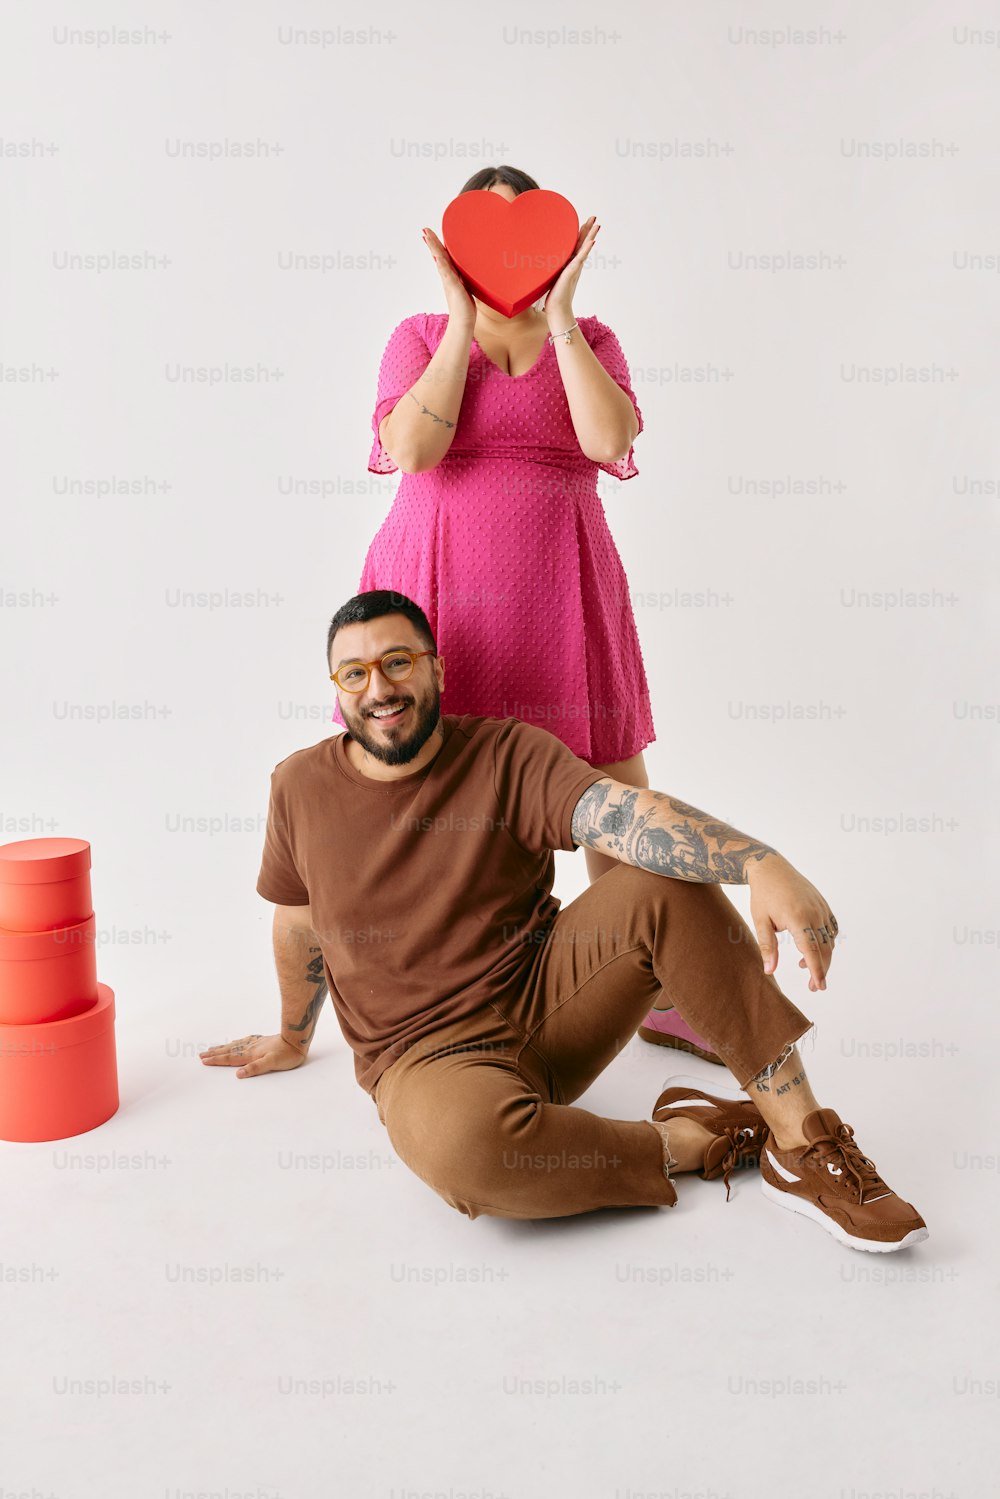 a man sitting on the ground next to a woman holding a heart